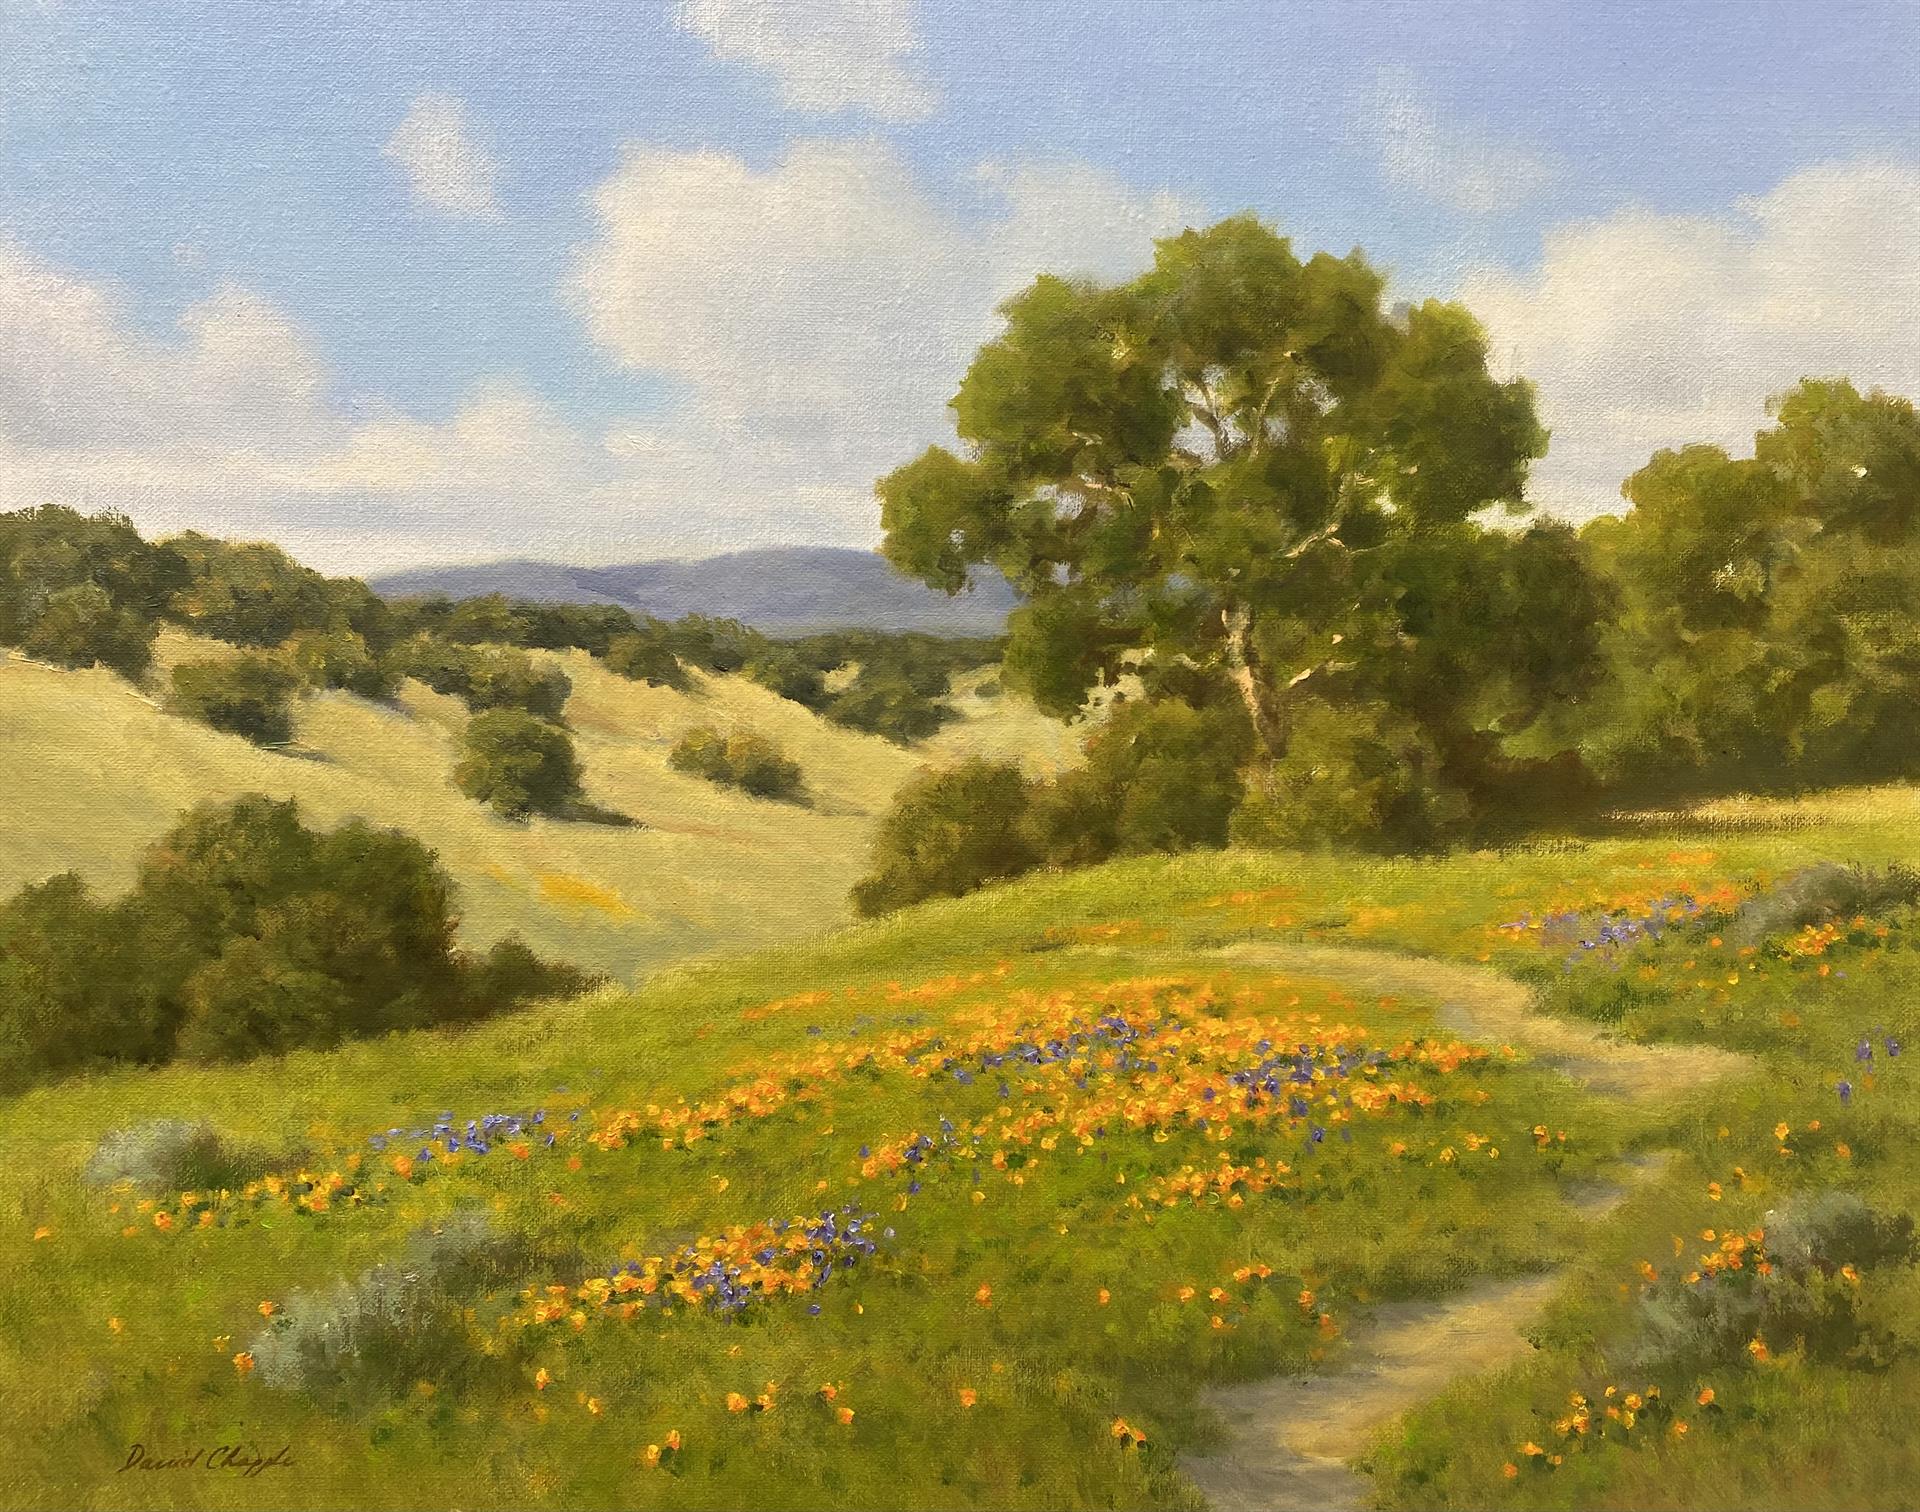 DAVE CHAPPLE - SPRING FOOTHILLS - OIL ON LINEN - 20 X 16